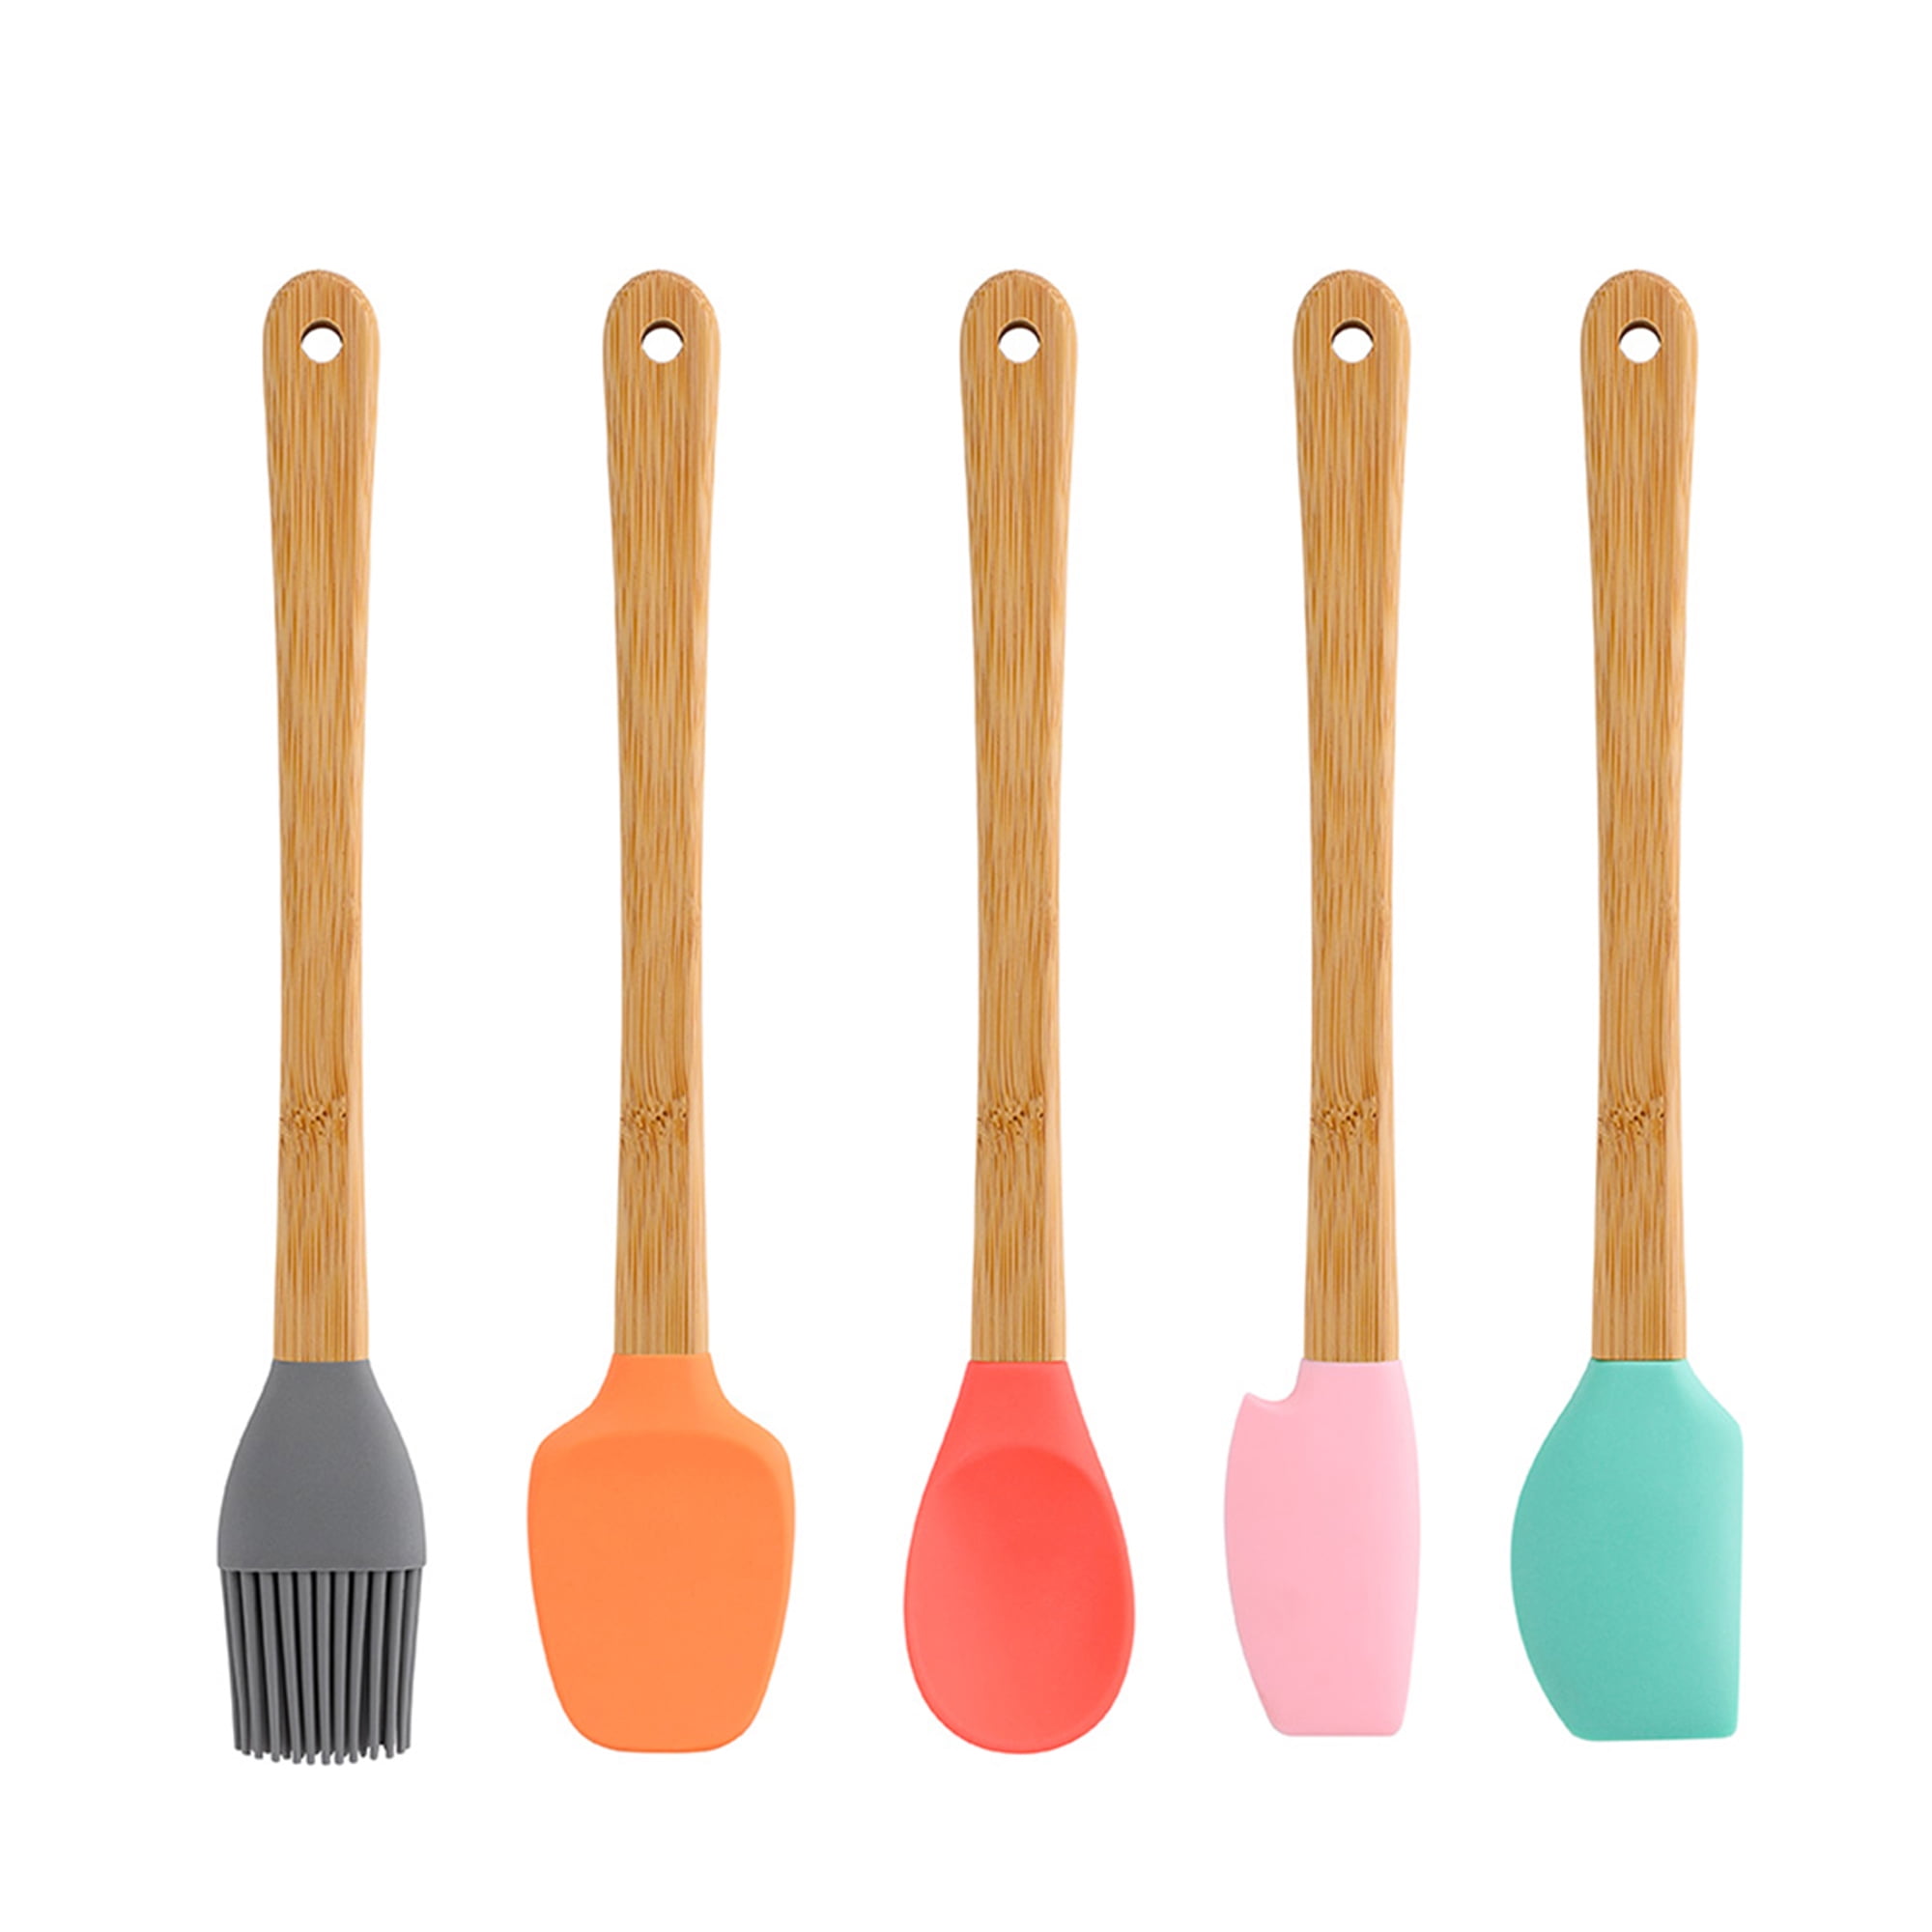 Large Size Silicone Spatula Butter Scraper Heat-Resistant Pastry Tool c. 